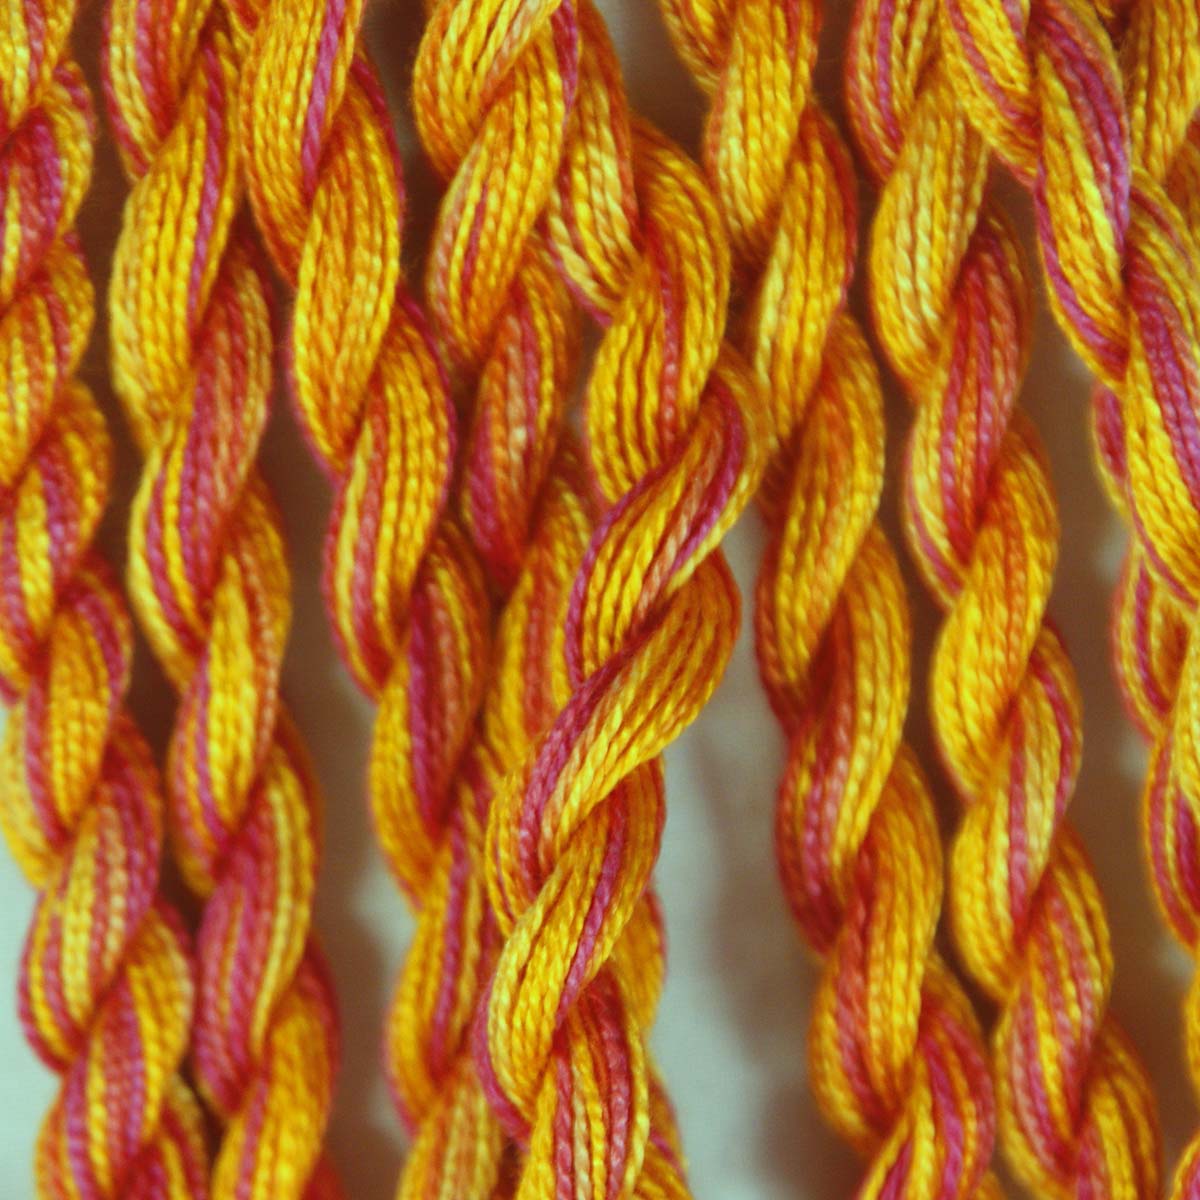 www.colourstreams.com.au Colour Streams Hand Dyed Swww.colourstreams.com.au Colour Streams Hand Dyed Cotton Threads Cotto Strands Slow Stitch Embroidery Textile Arts Fibre DL 68 Tequila Sunrise  Oranges Yellows Pinks